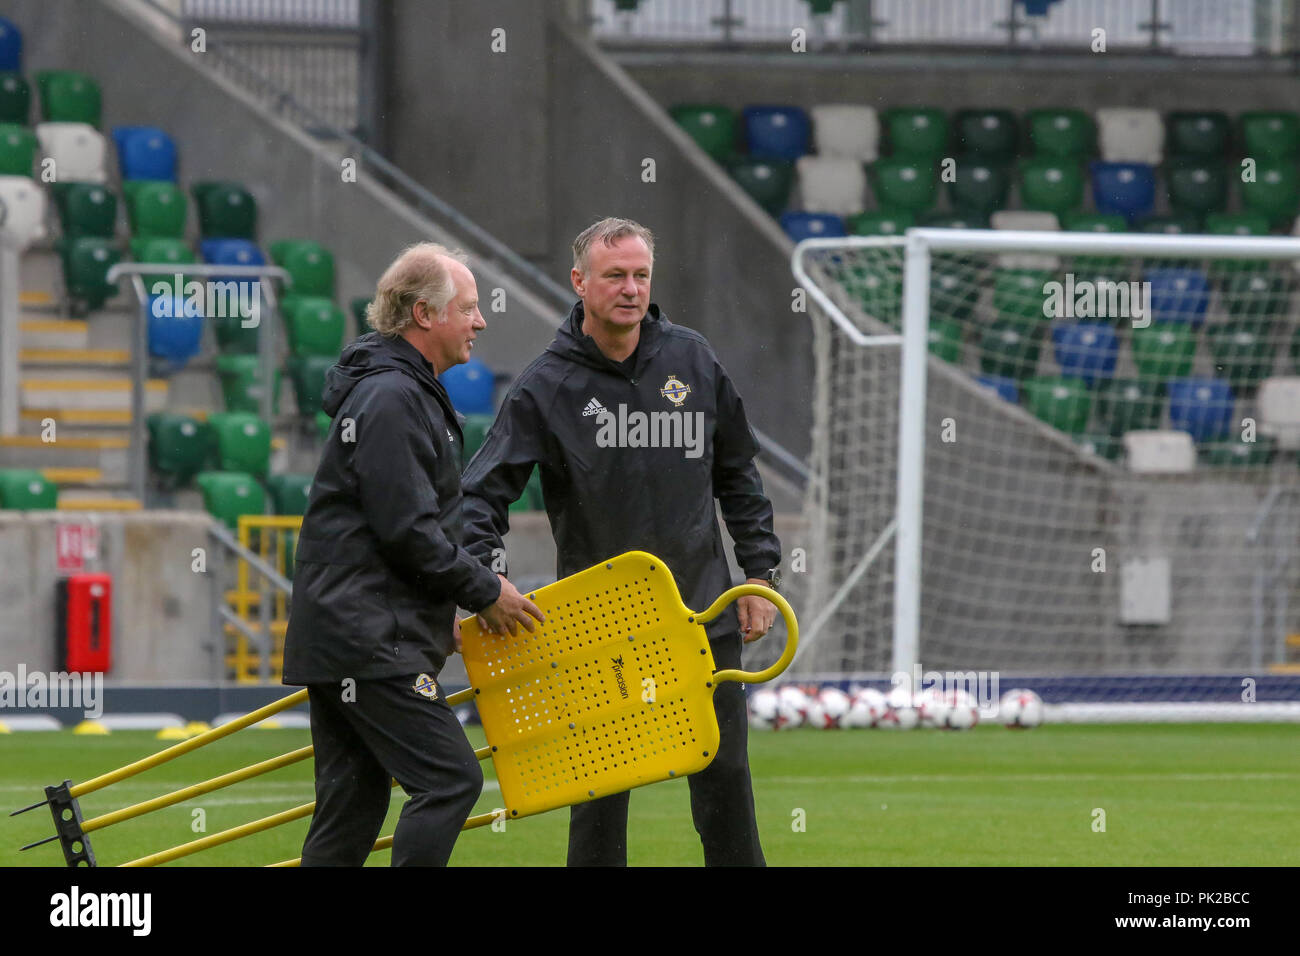 Windsor Park, Belfast, Northern Ireland. 10 September 2018. After Saturday's defeat in the UEFA Nations League, Northern Ireland returned to training this morning at Windsor Park. Tomorrow night they play Israel in a friendly international. Northern ireland manager Michael O'Neill (left) with assistant Jimmy Nicholl. Credit: David Hunter/Alamy Live News. Stock Photo